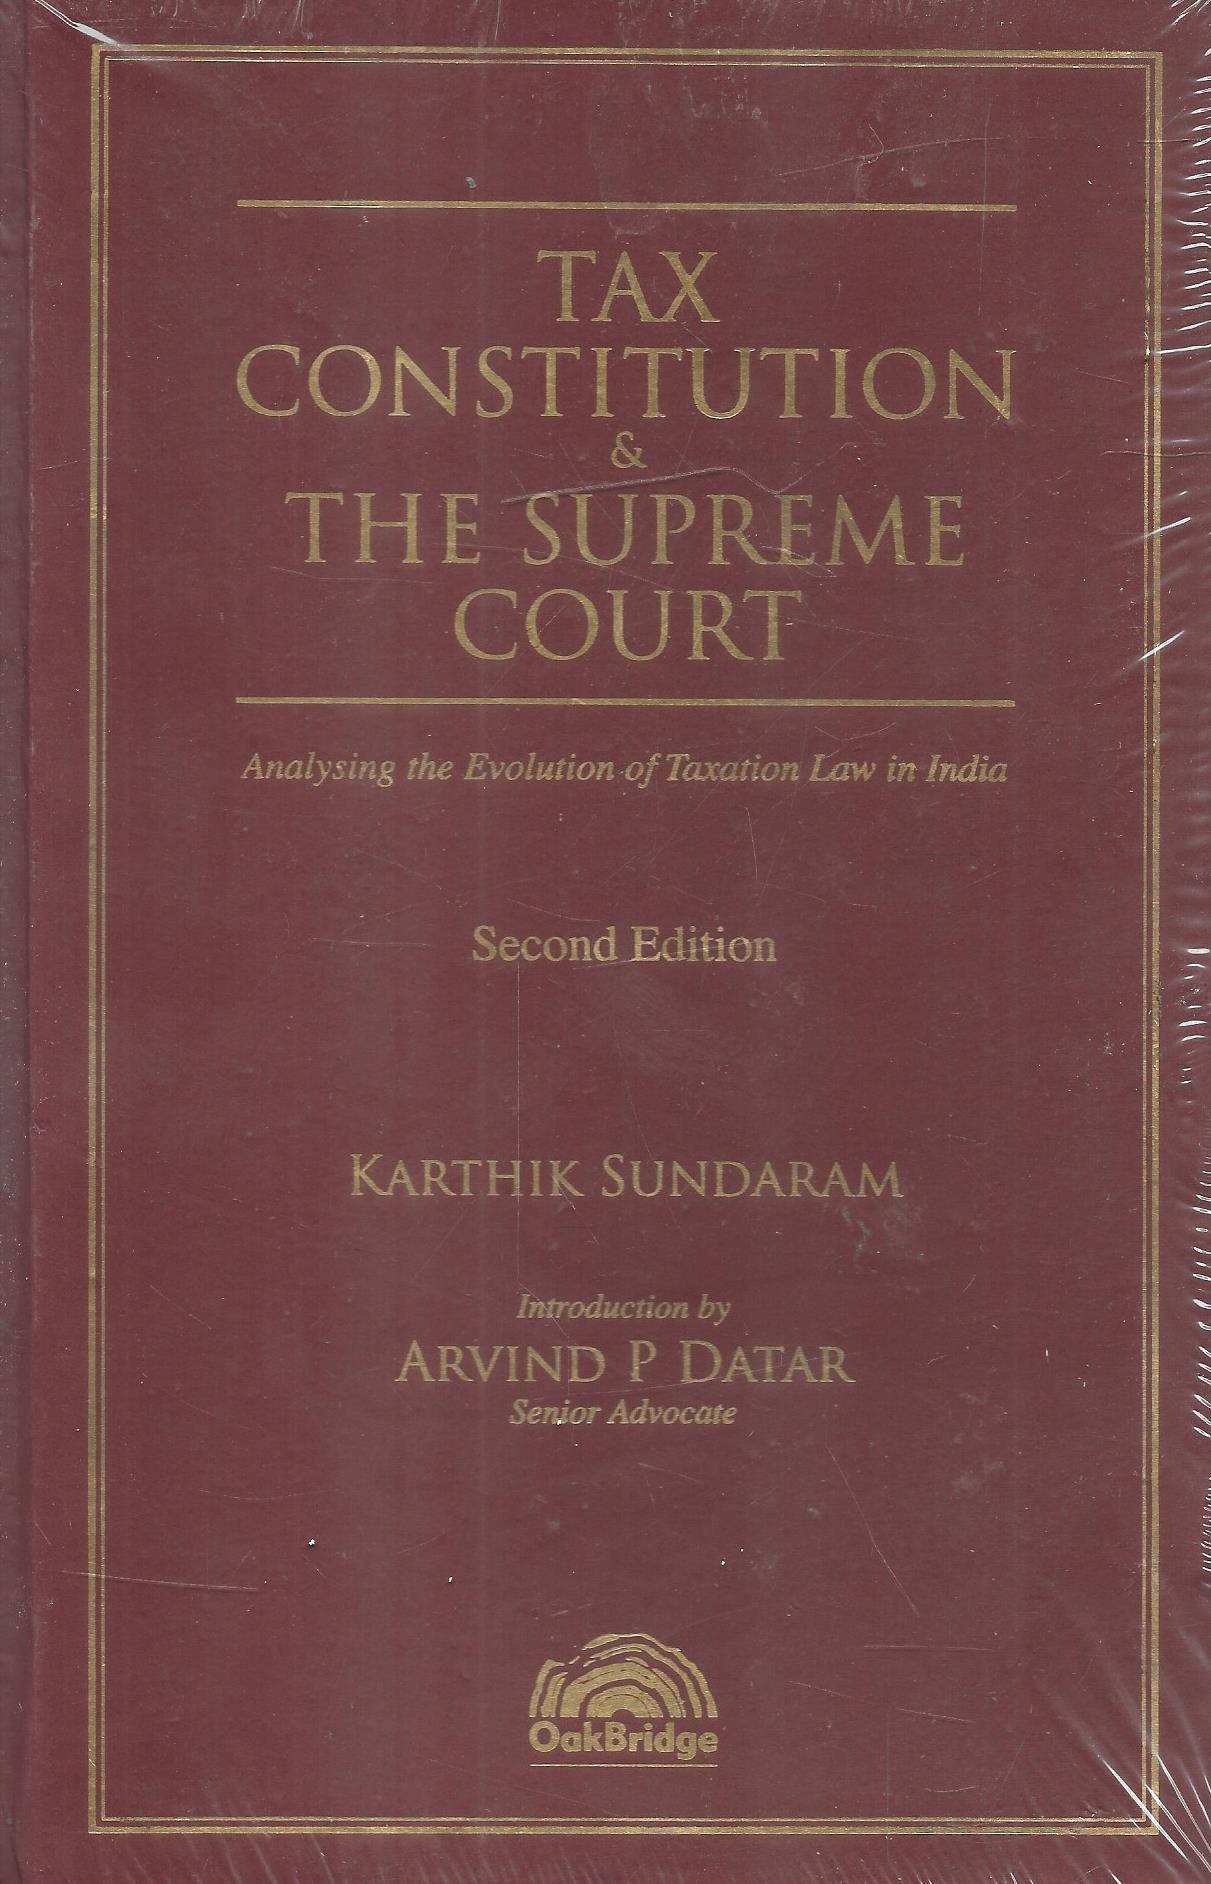 Tax Constitution & The Supreme Court Analysing The Evolution Of Taxation Law In India